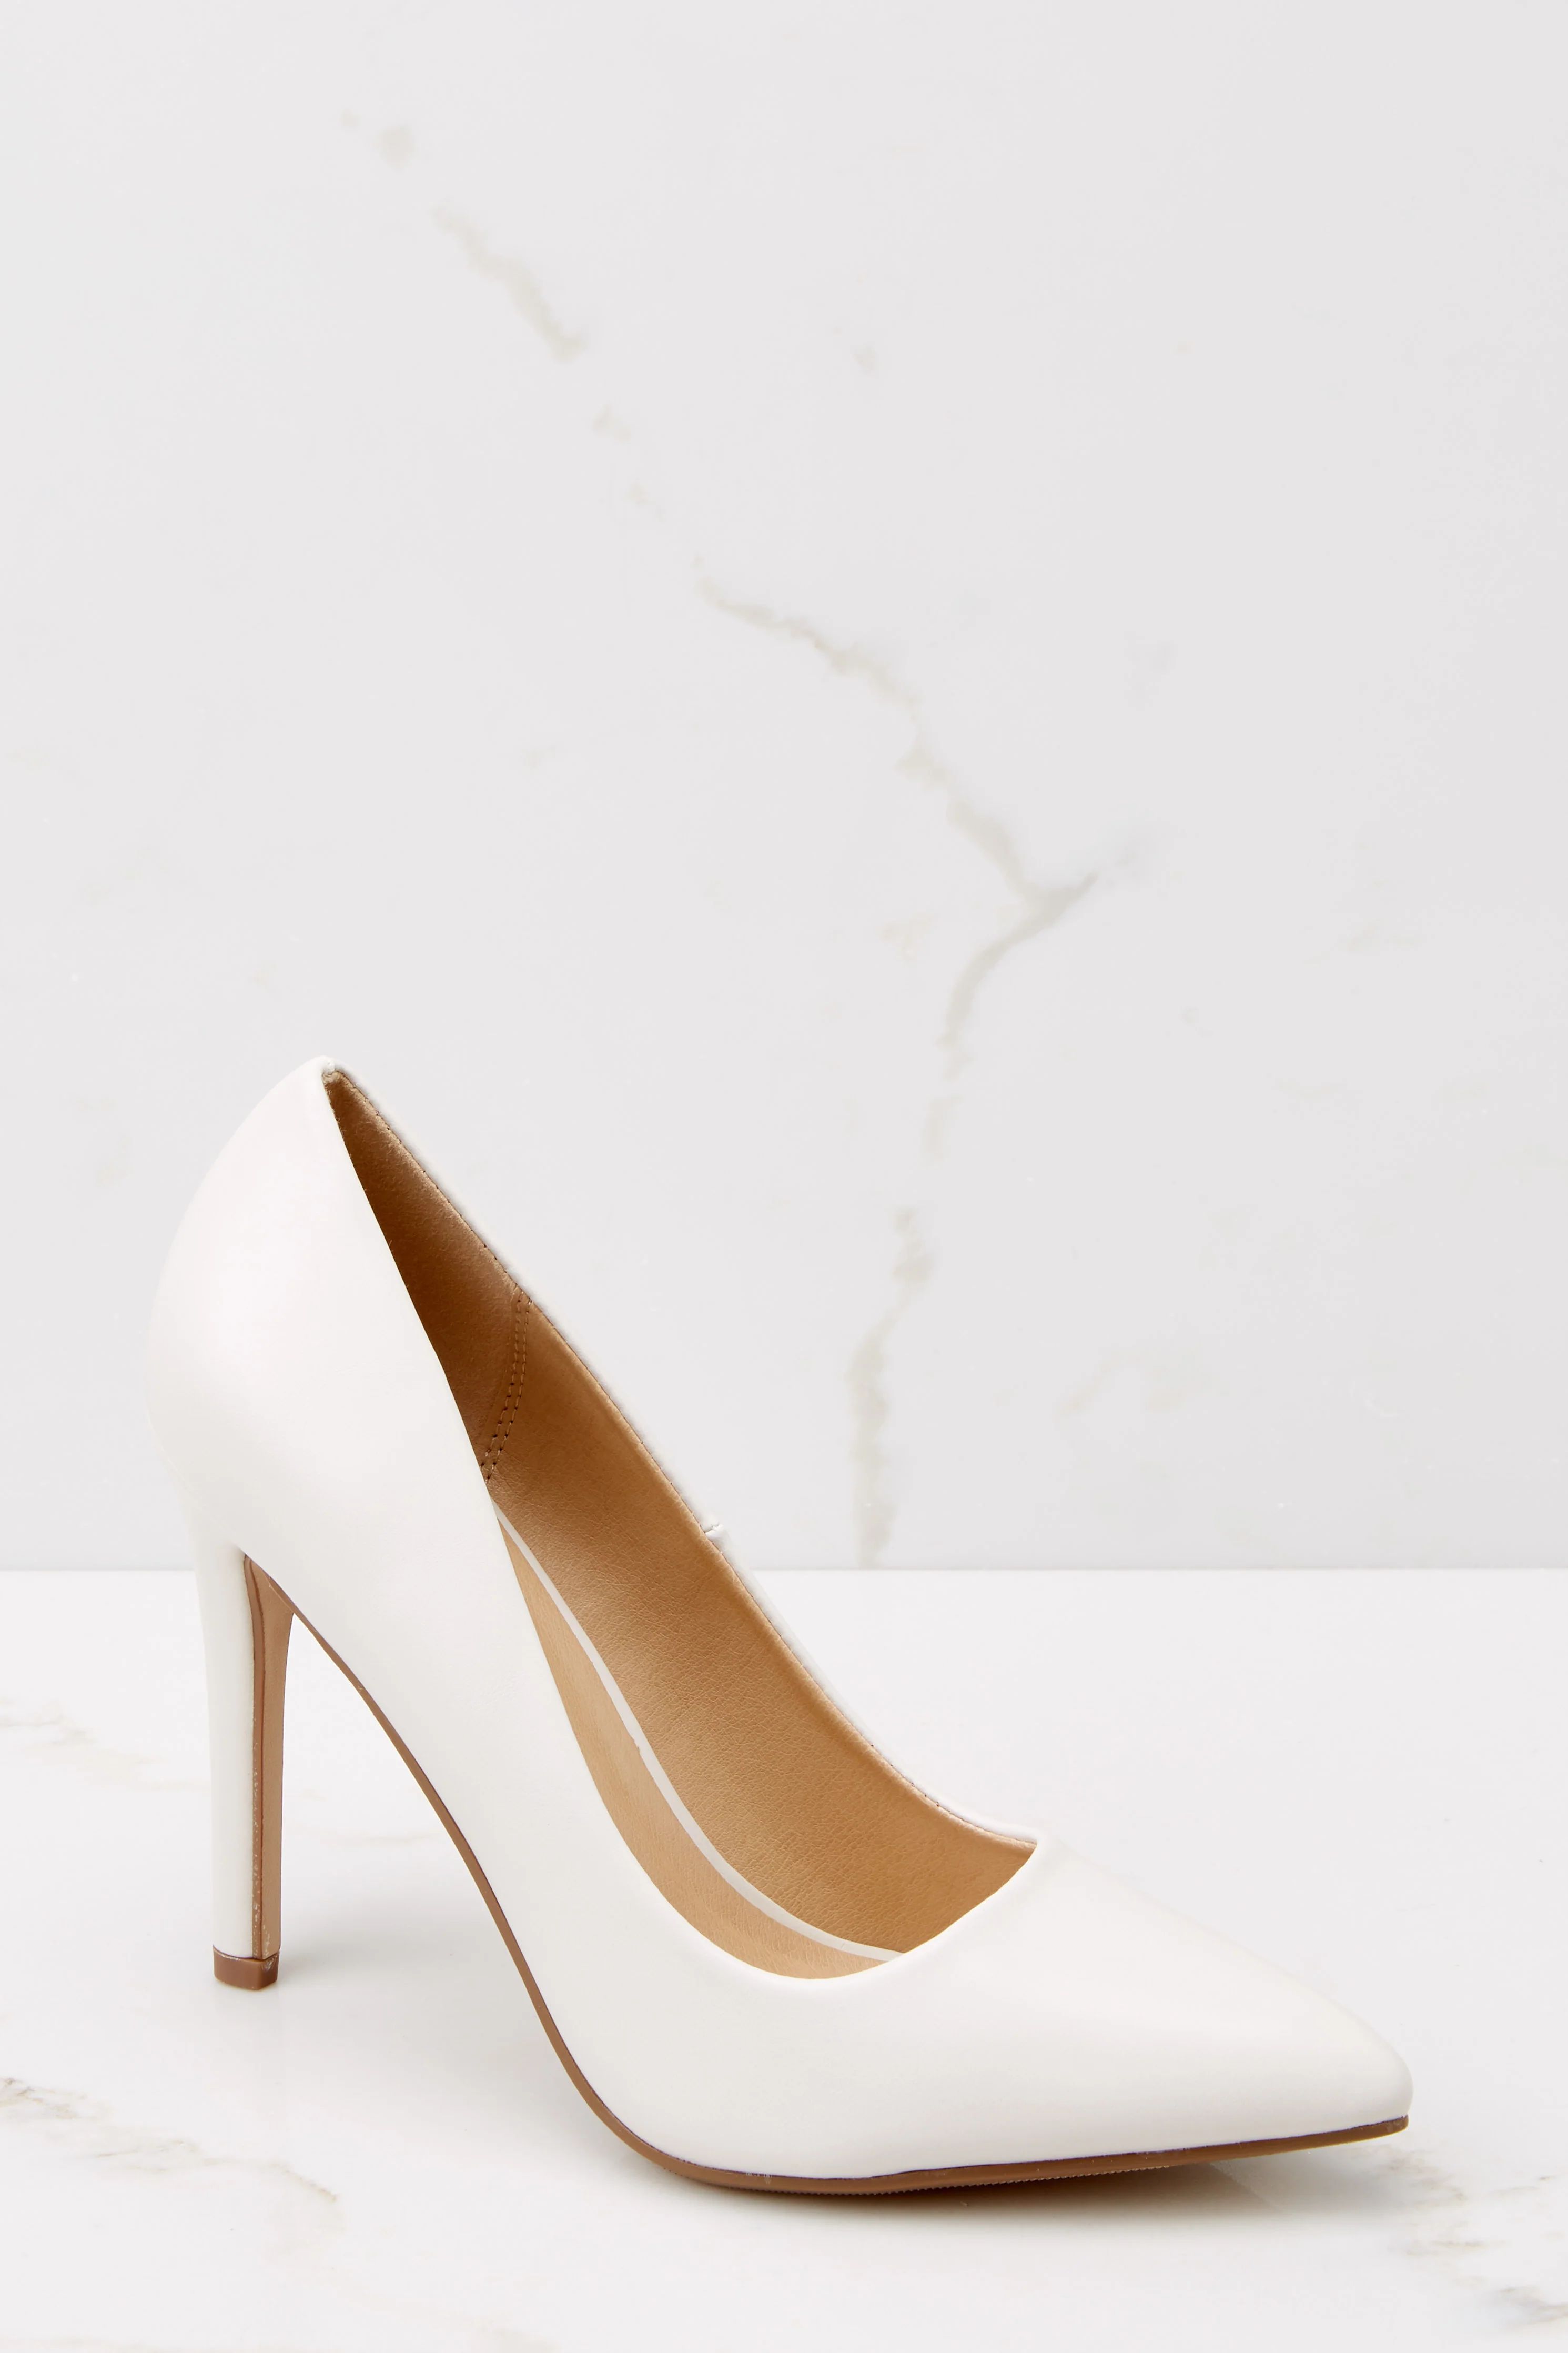 Picture Perfect Ivory Pointed Pumps | Red Dress 